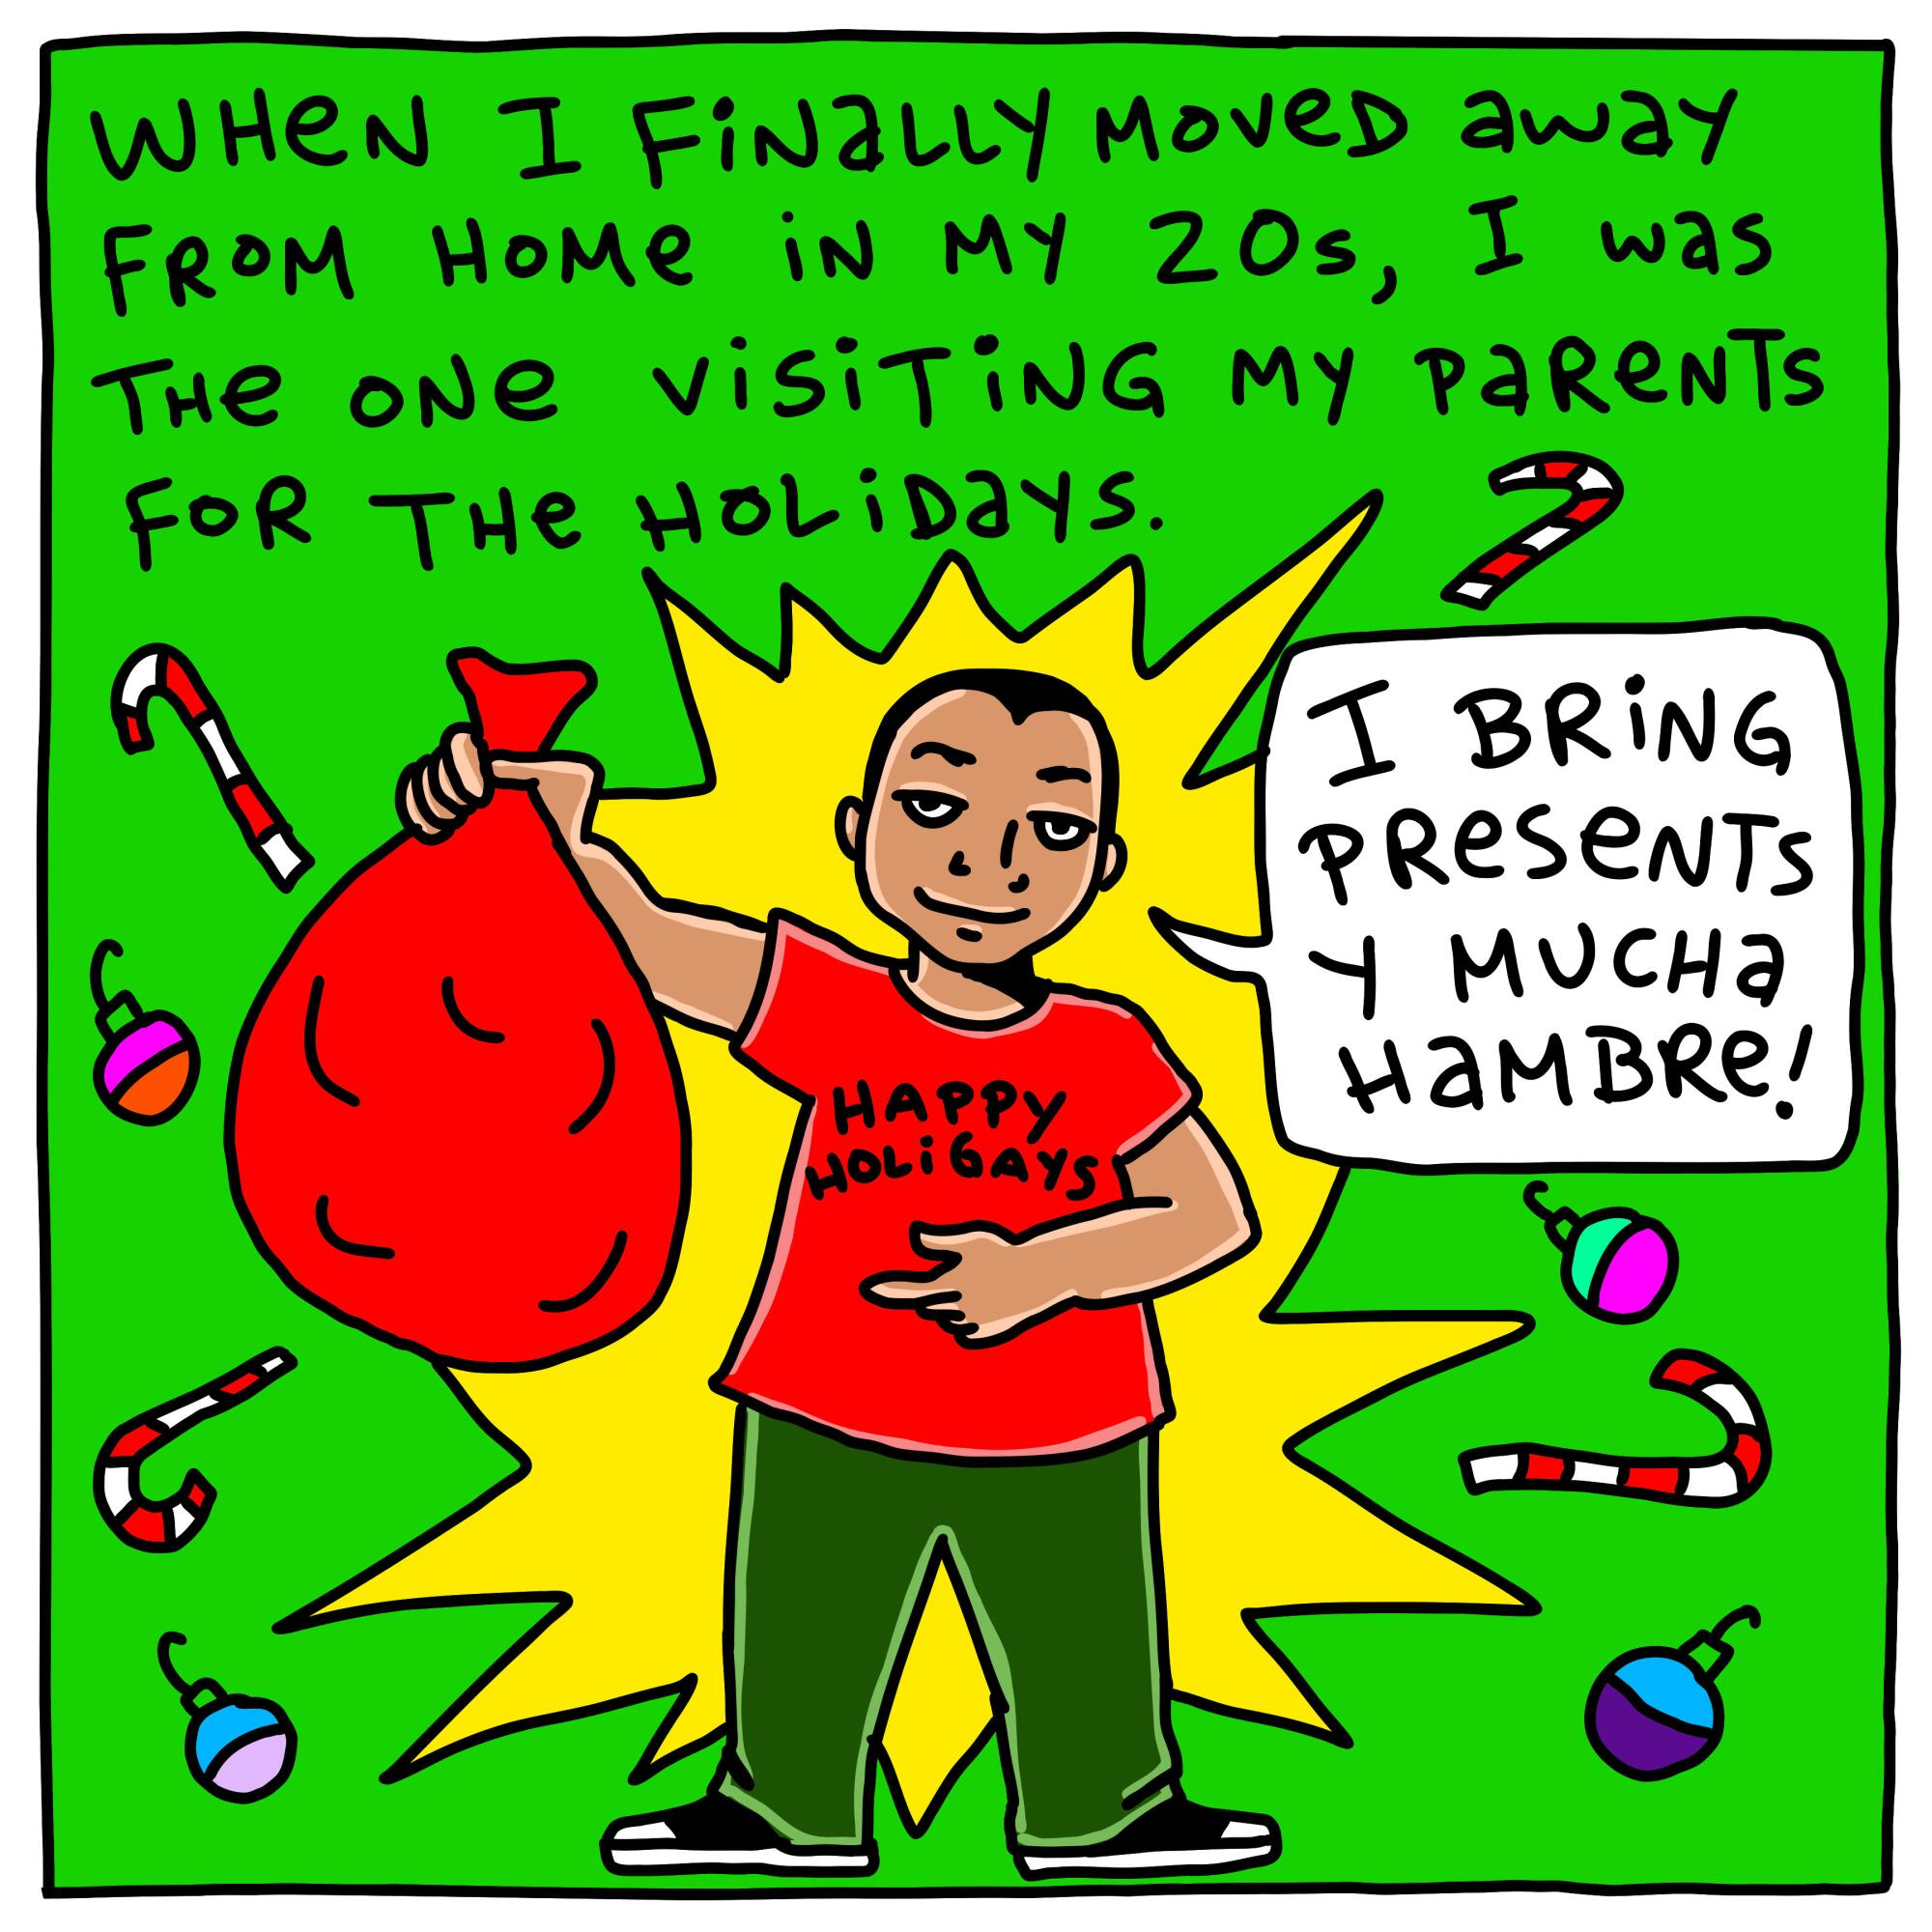 When I finally moved away from home in my 20s, I was the one visiting my parents for the holidays 